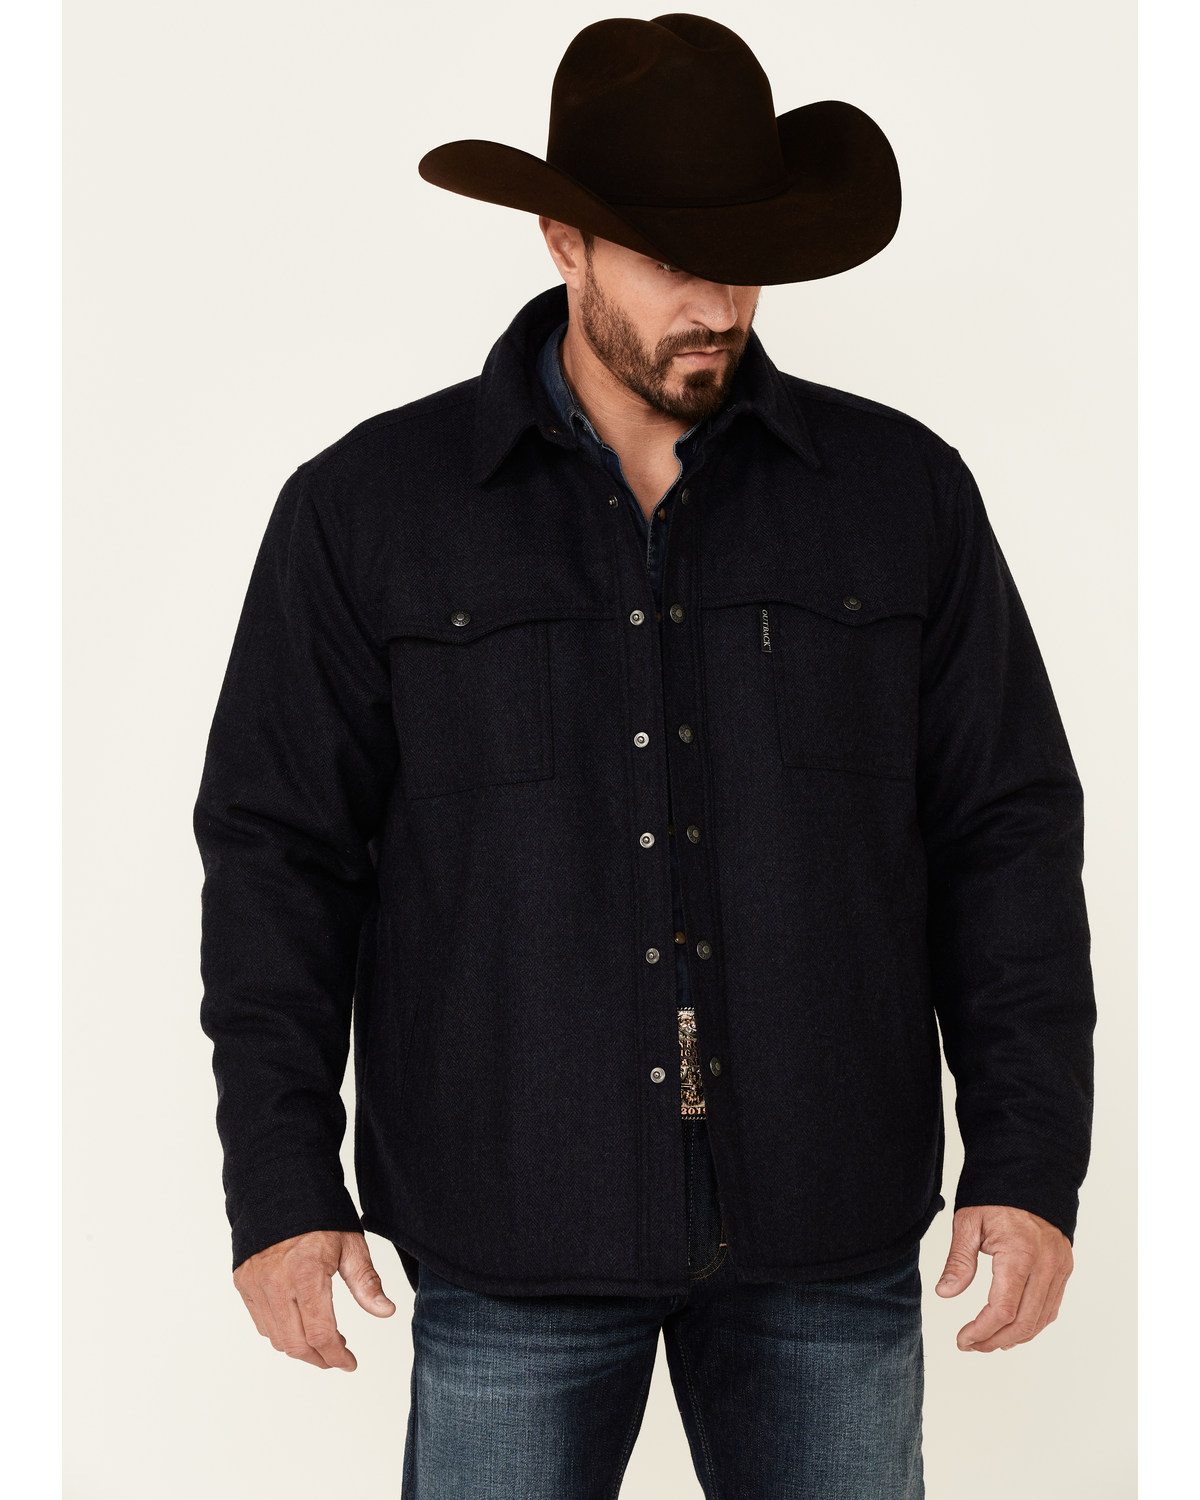 Outback Trading Co Men's Solid Harrison Snap-Front Jacket